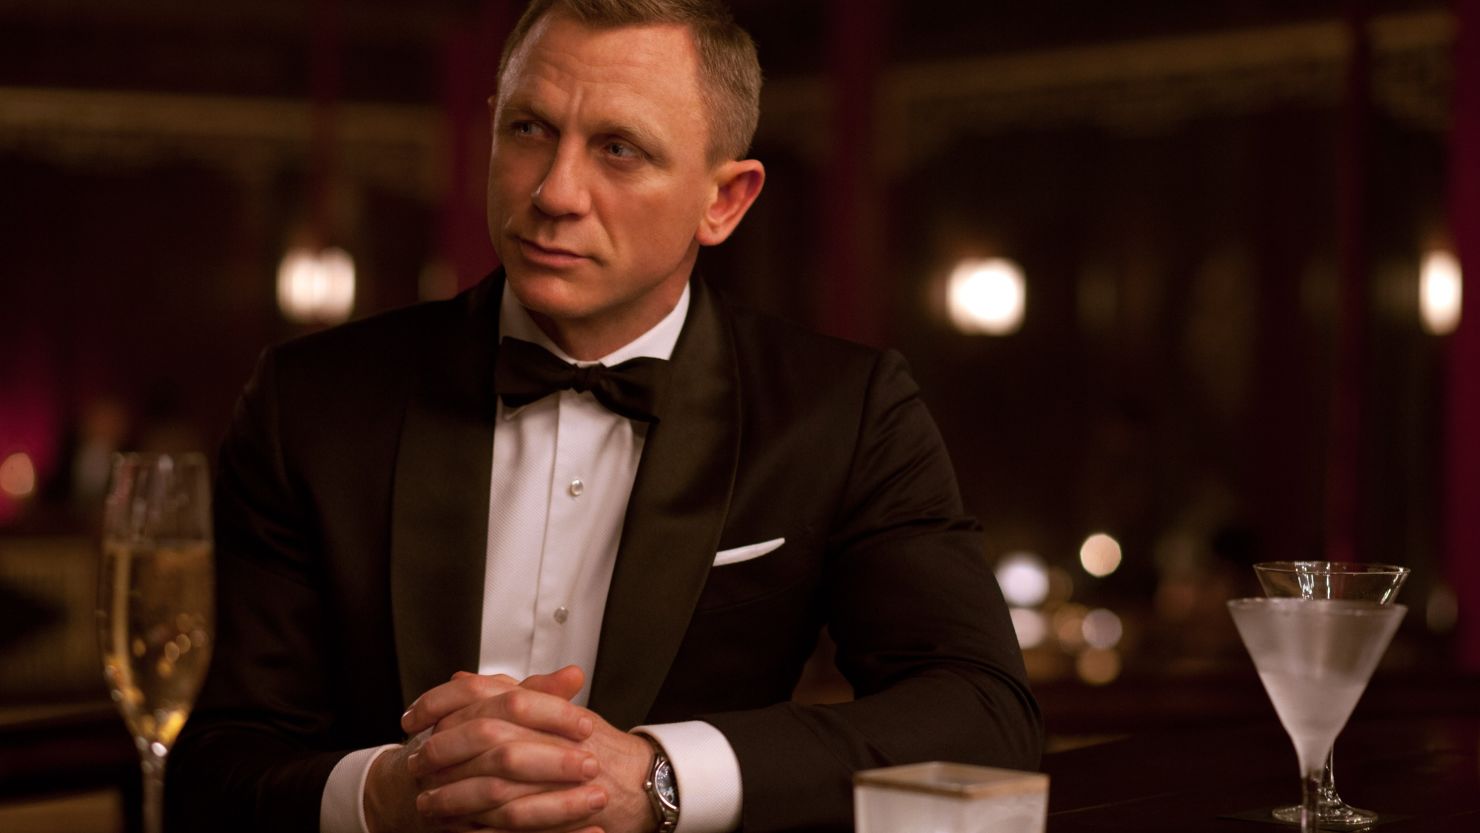 James Bond may want to reconsider his drinking habits, a new study says.